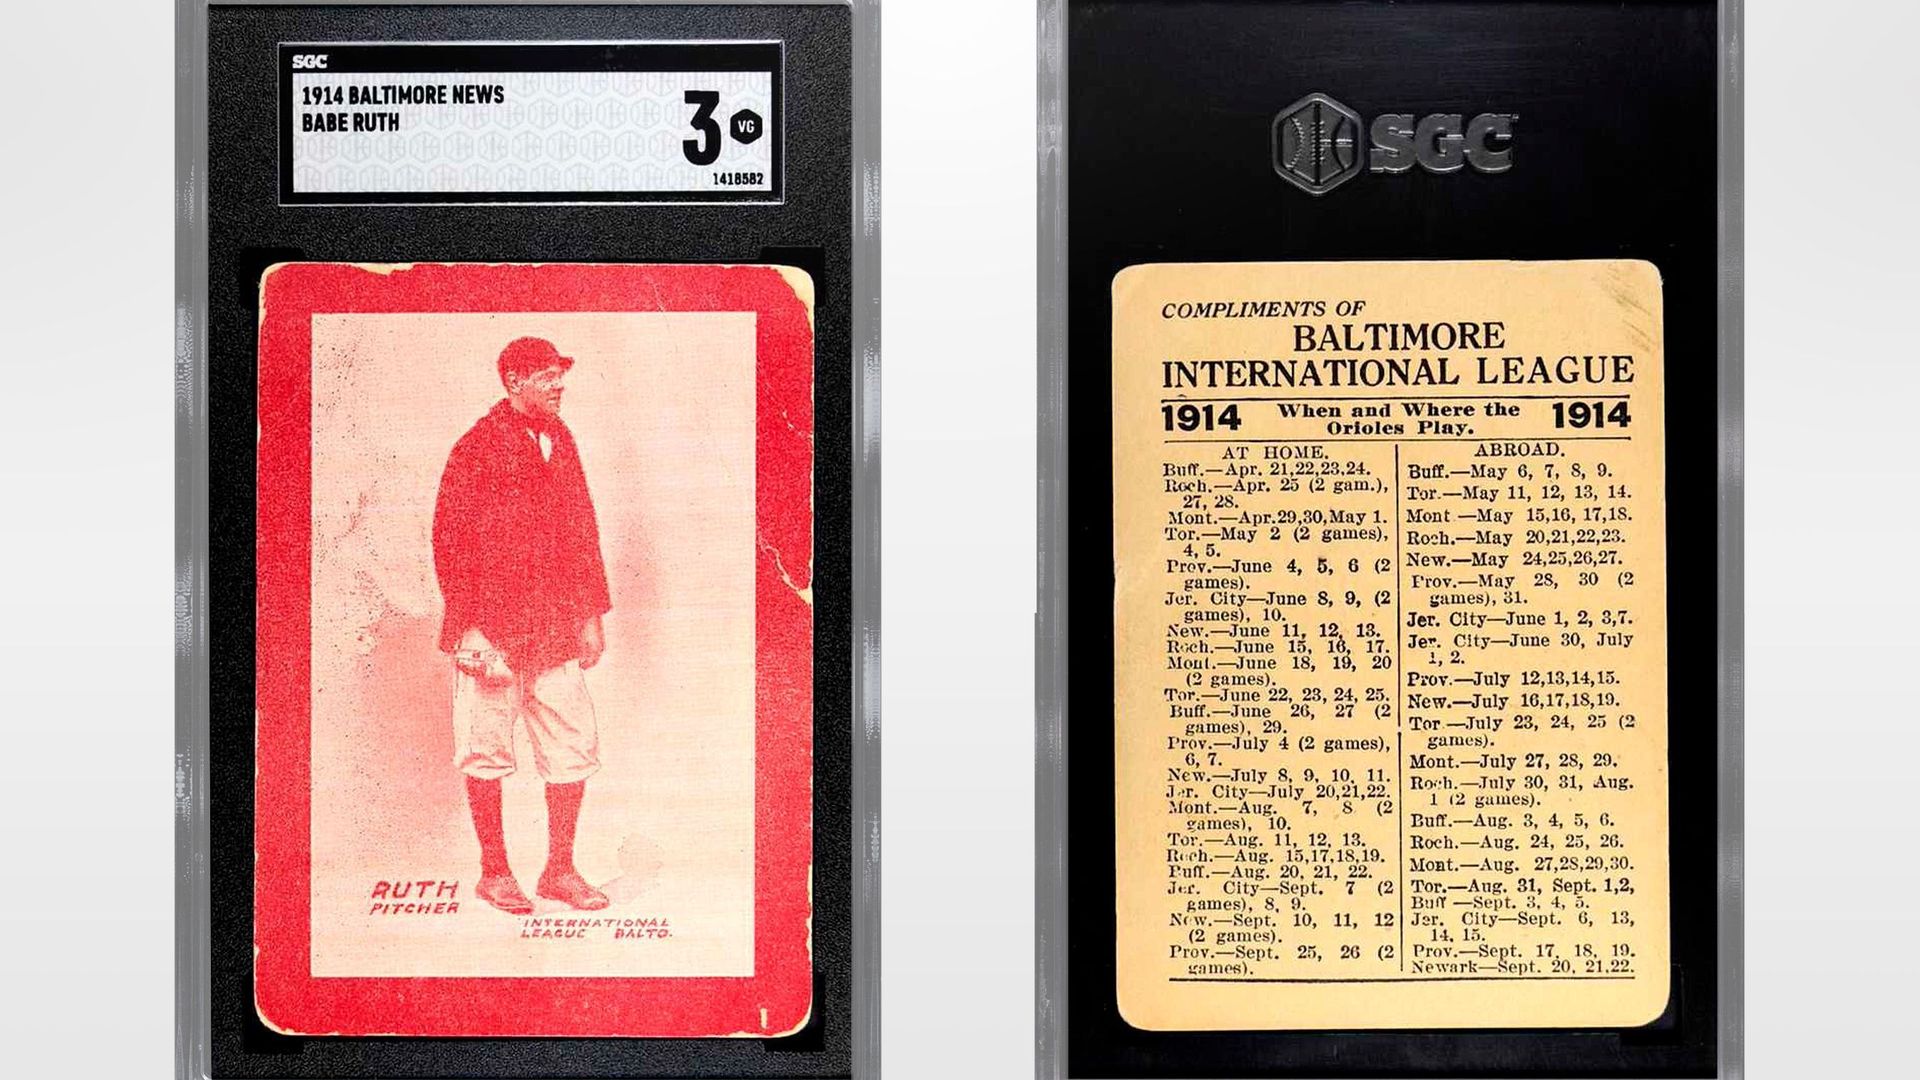 1914 Babe Ruth Minor League Card Sold for $575,000